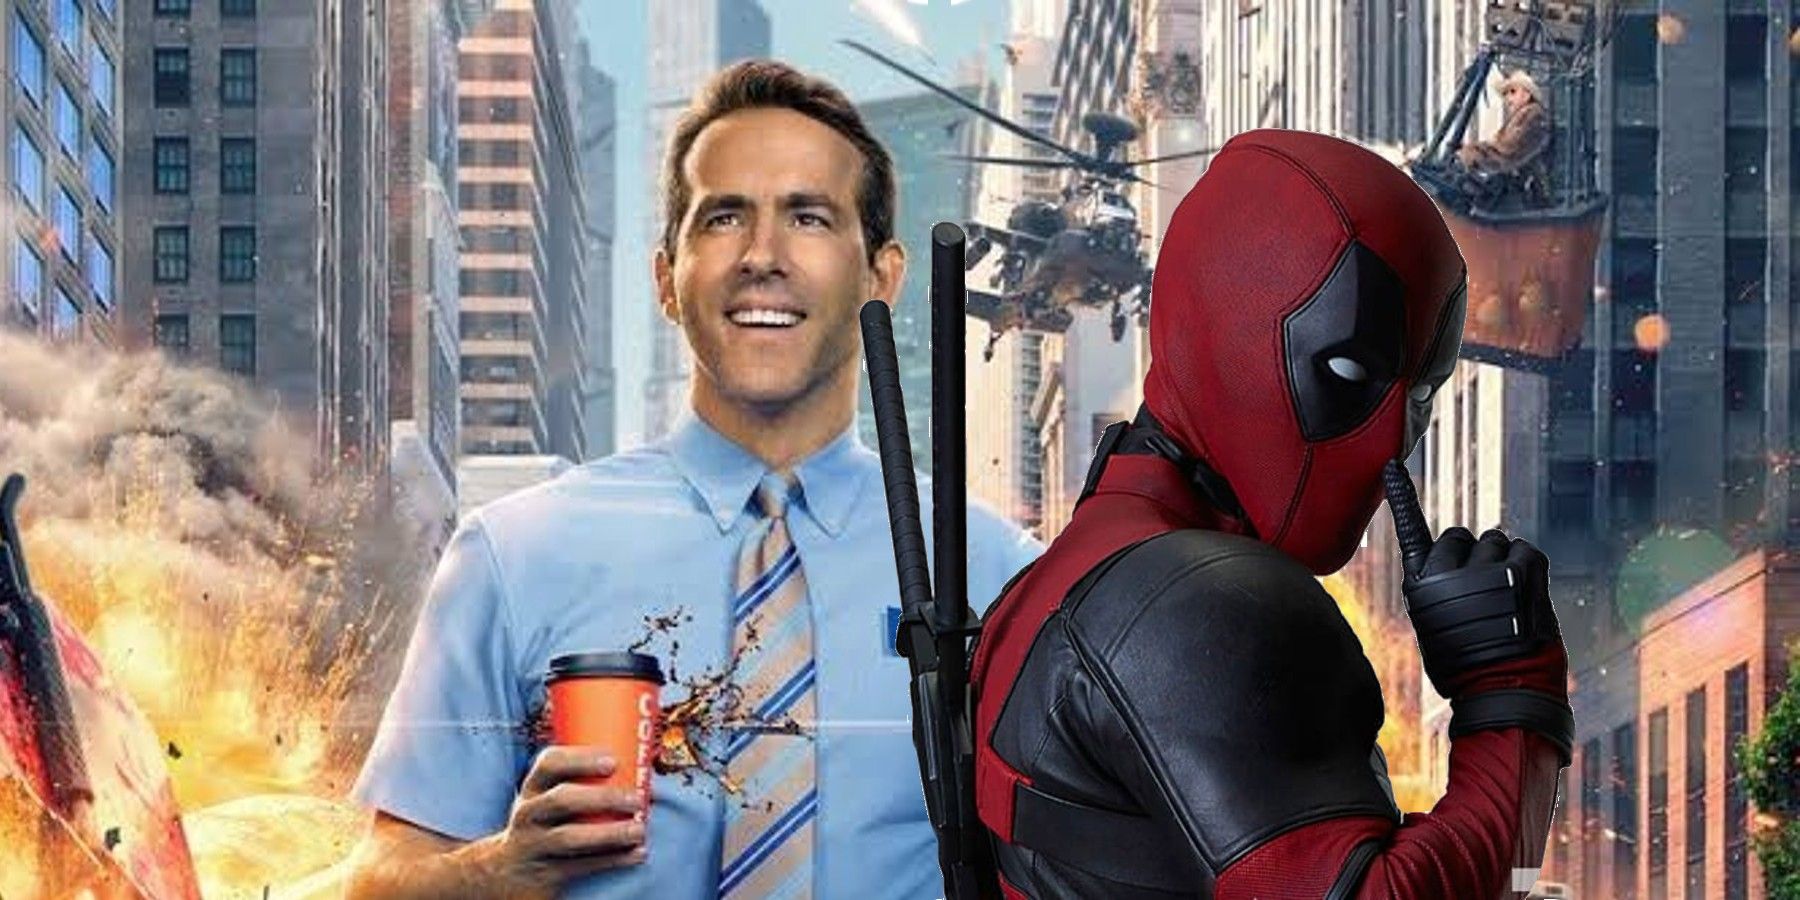 Free Guy and Deadpool